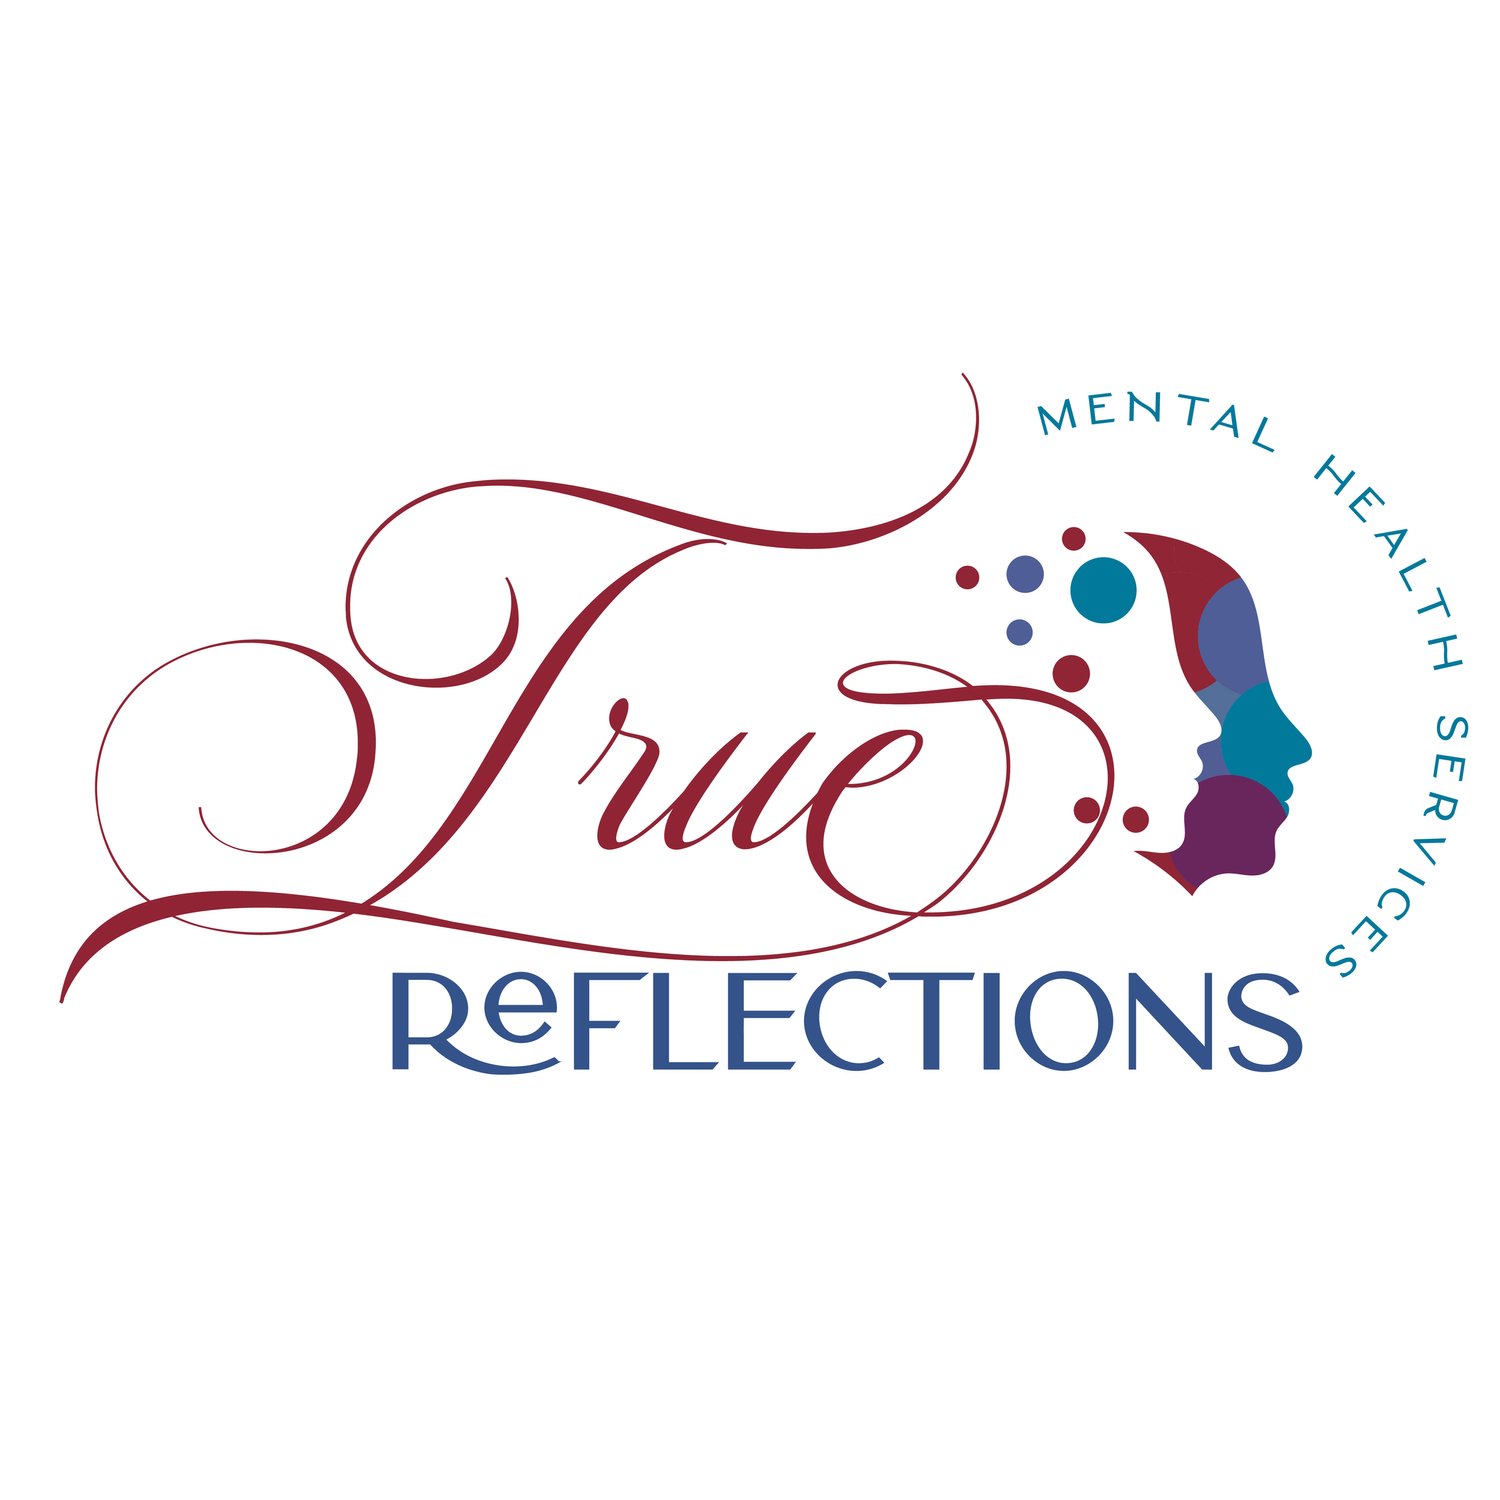 True Reflections Mental Health Services